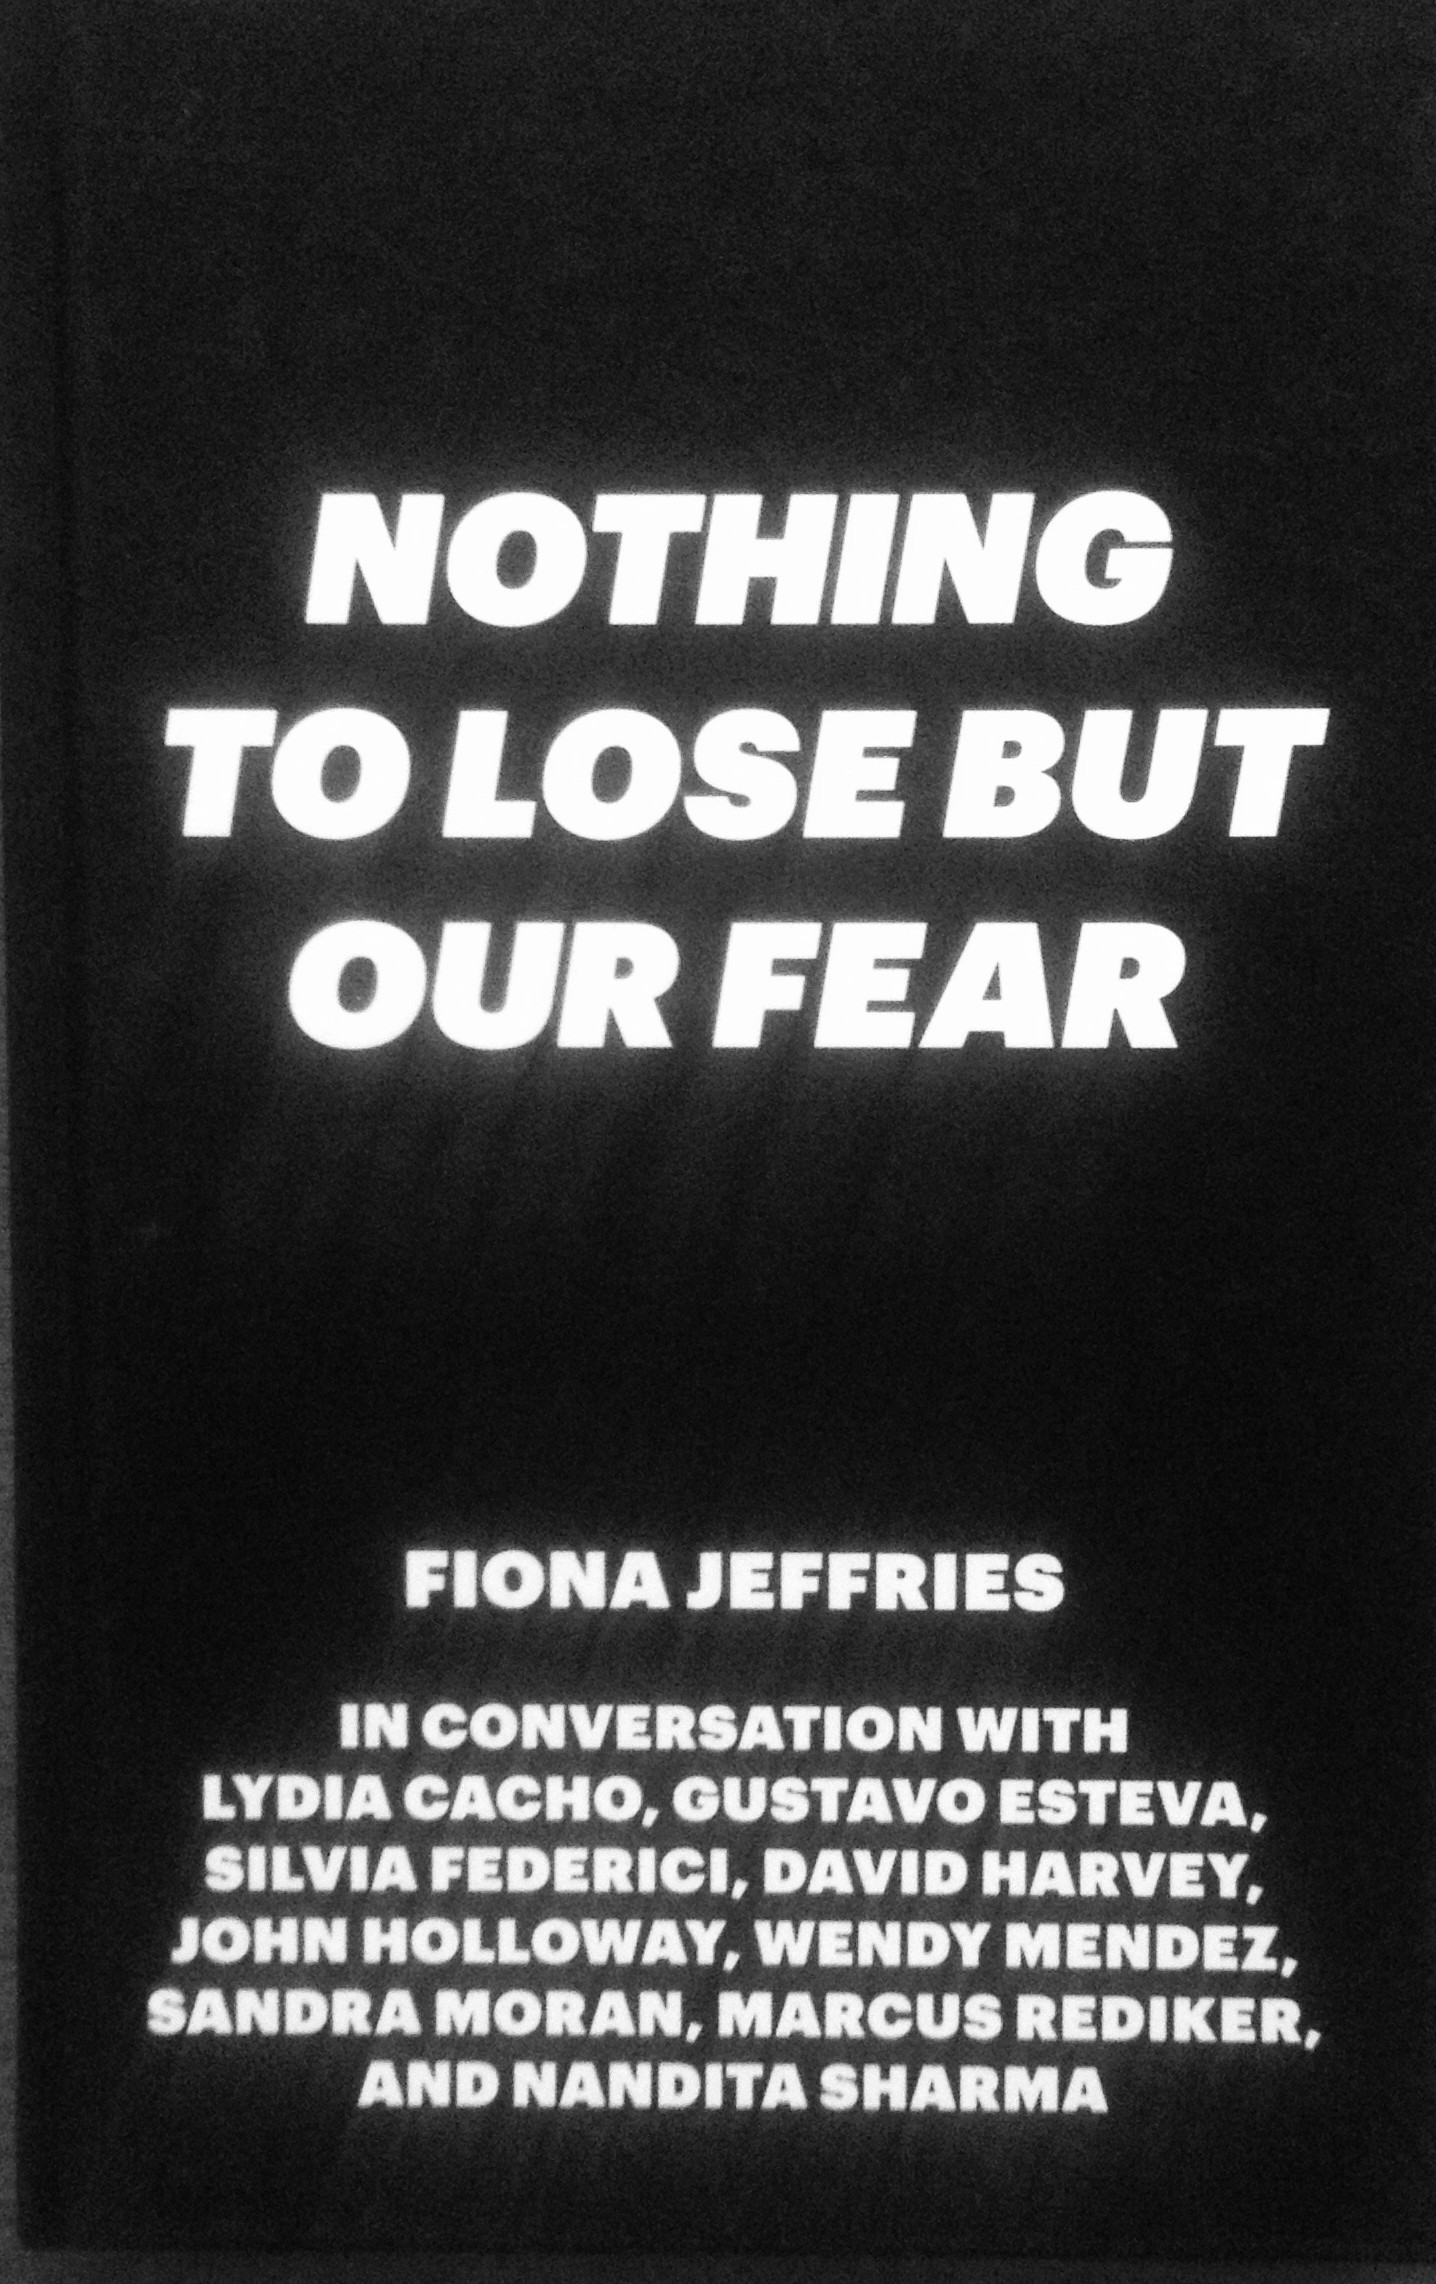 “Nothing to Lose but our Fear” Fiona Jeffries in conversation with Silvia Federici and David Harvey